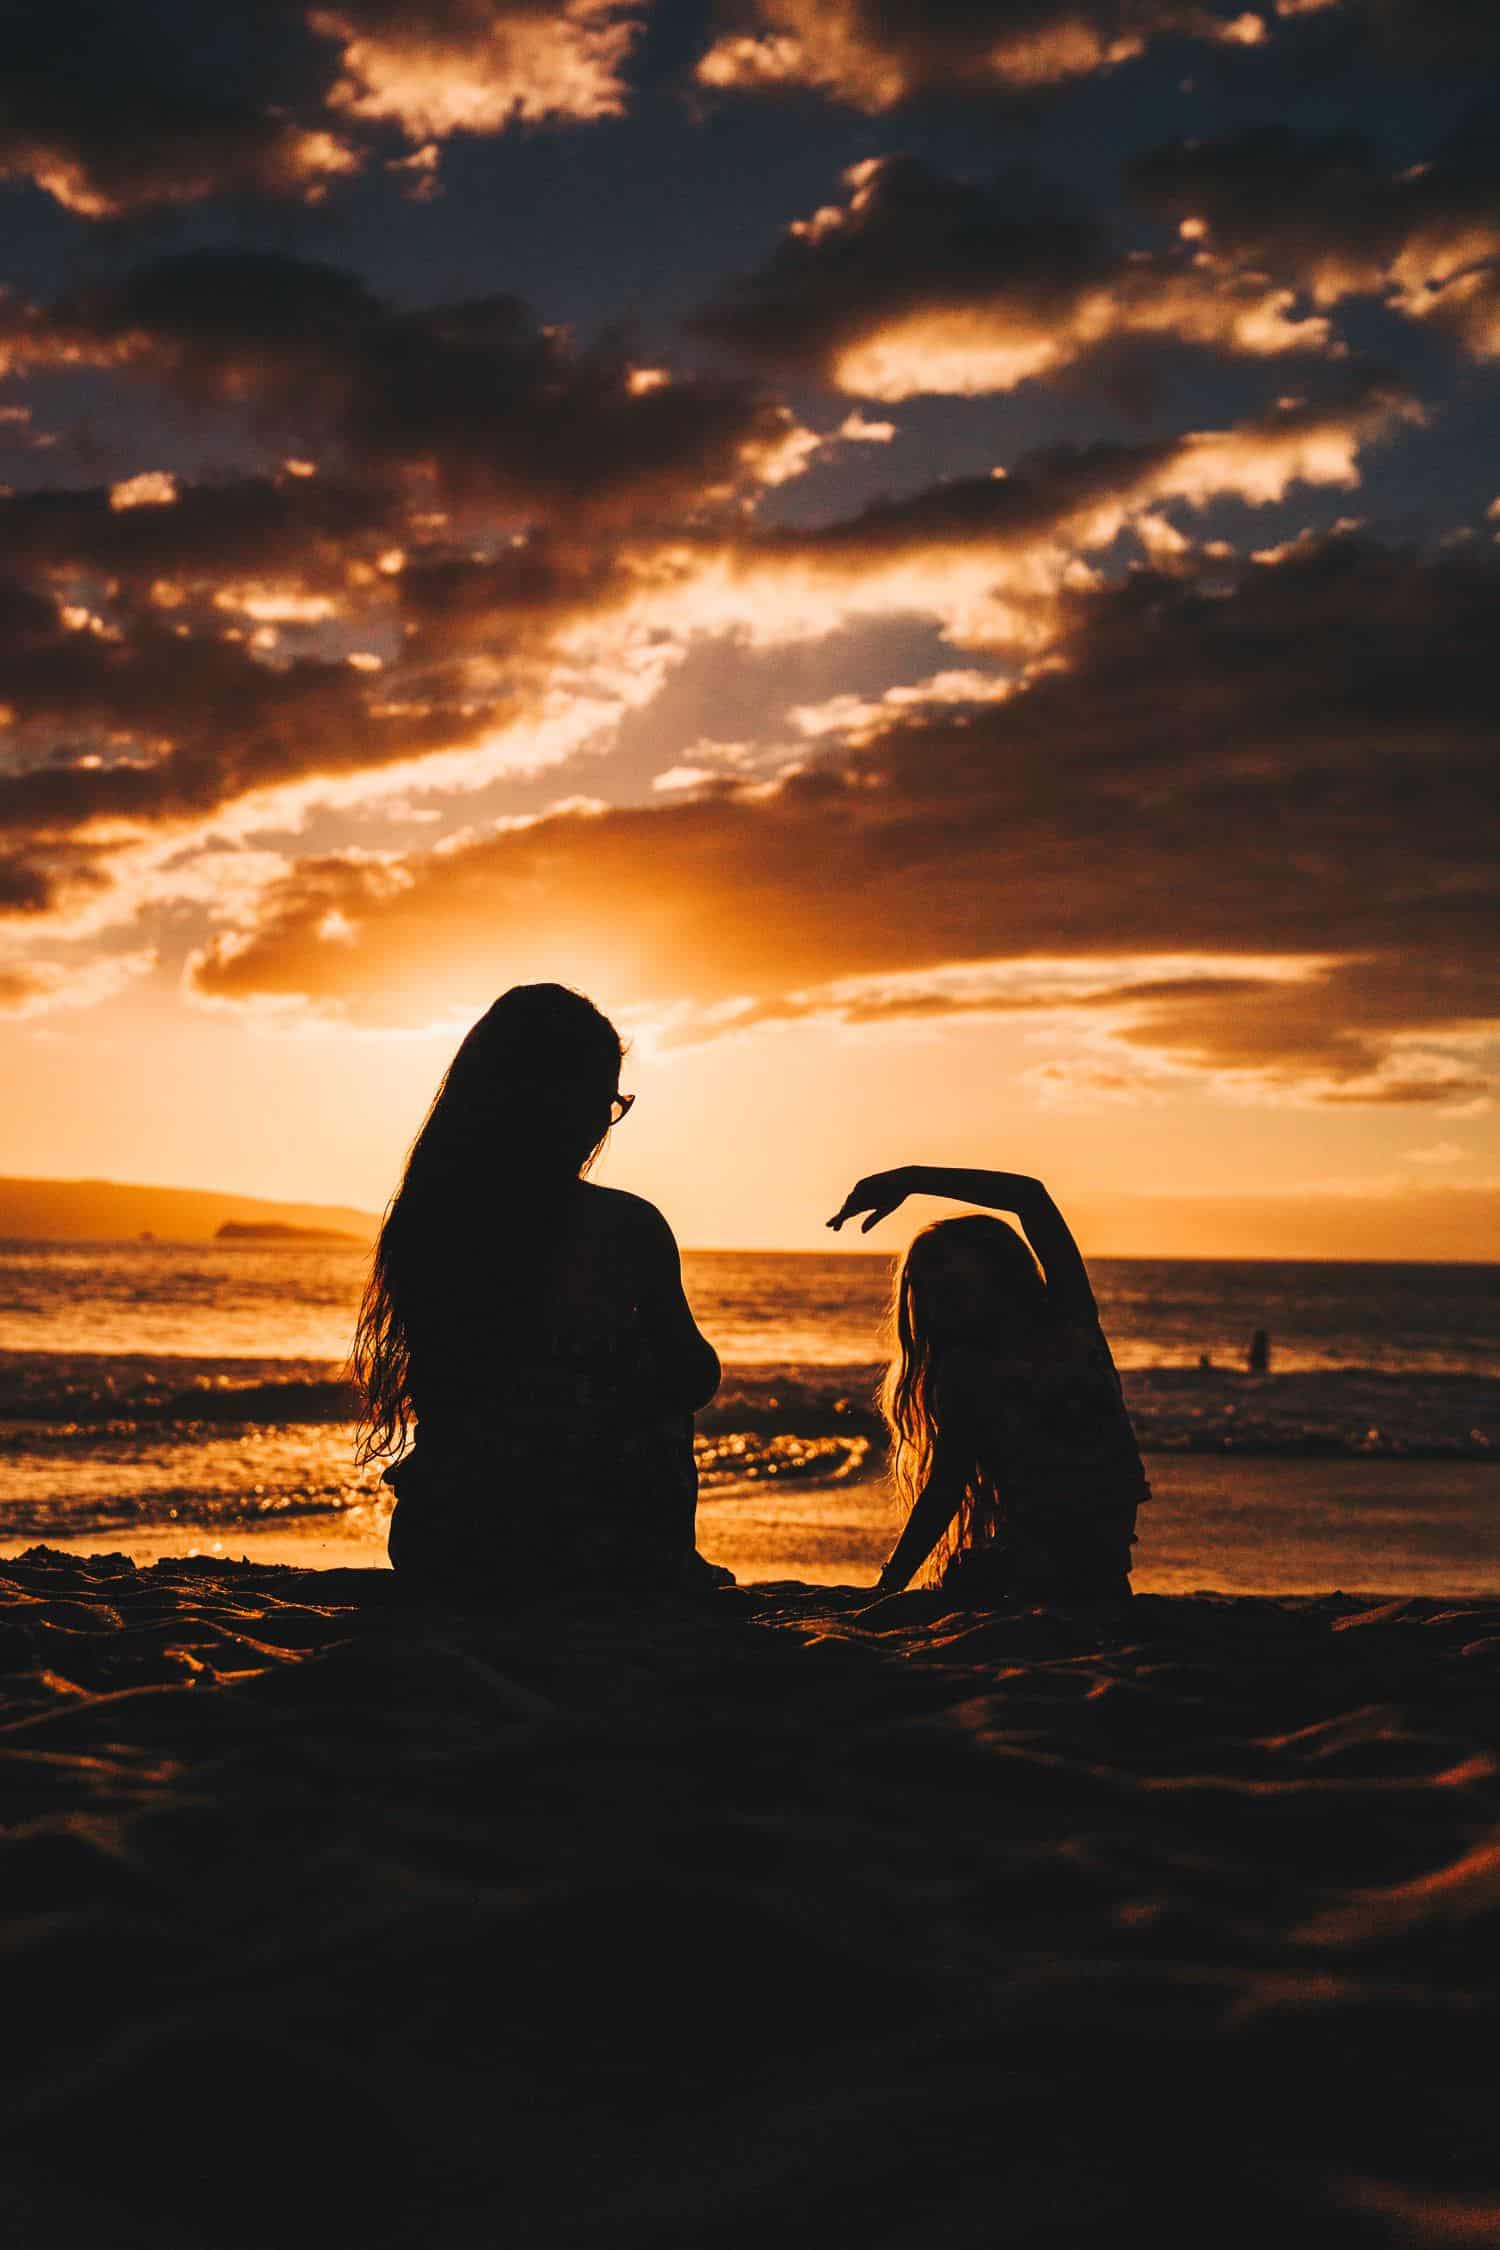 shadowed image of a woman and her daughter sitting on the beach together